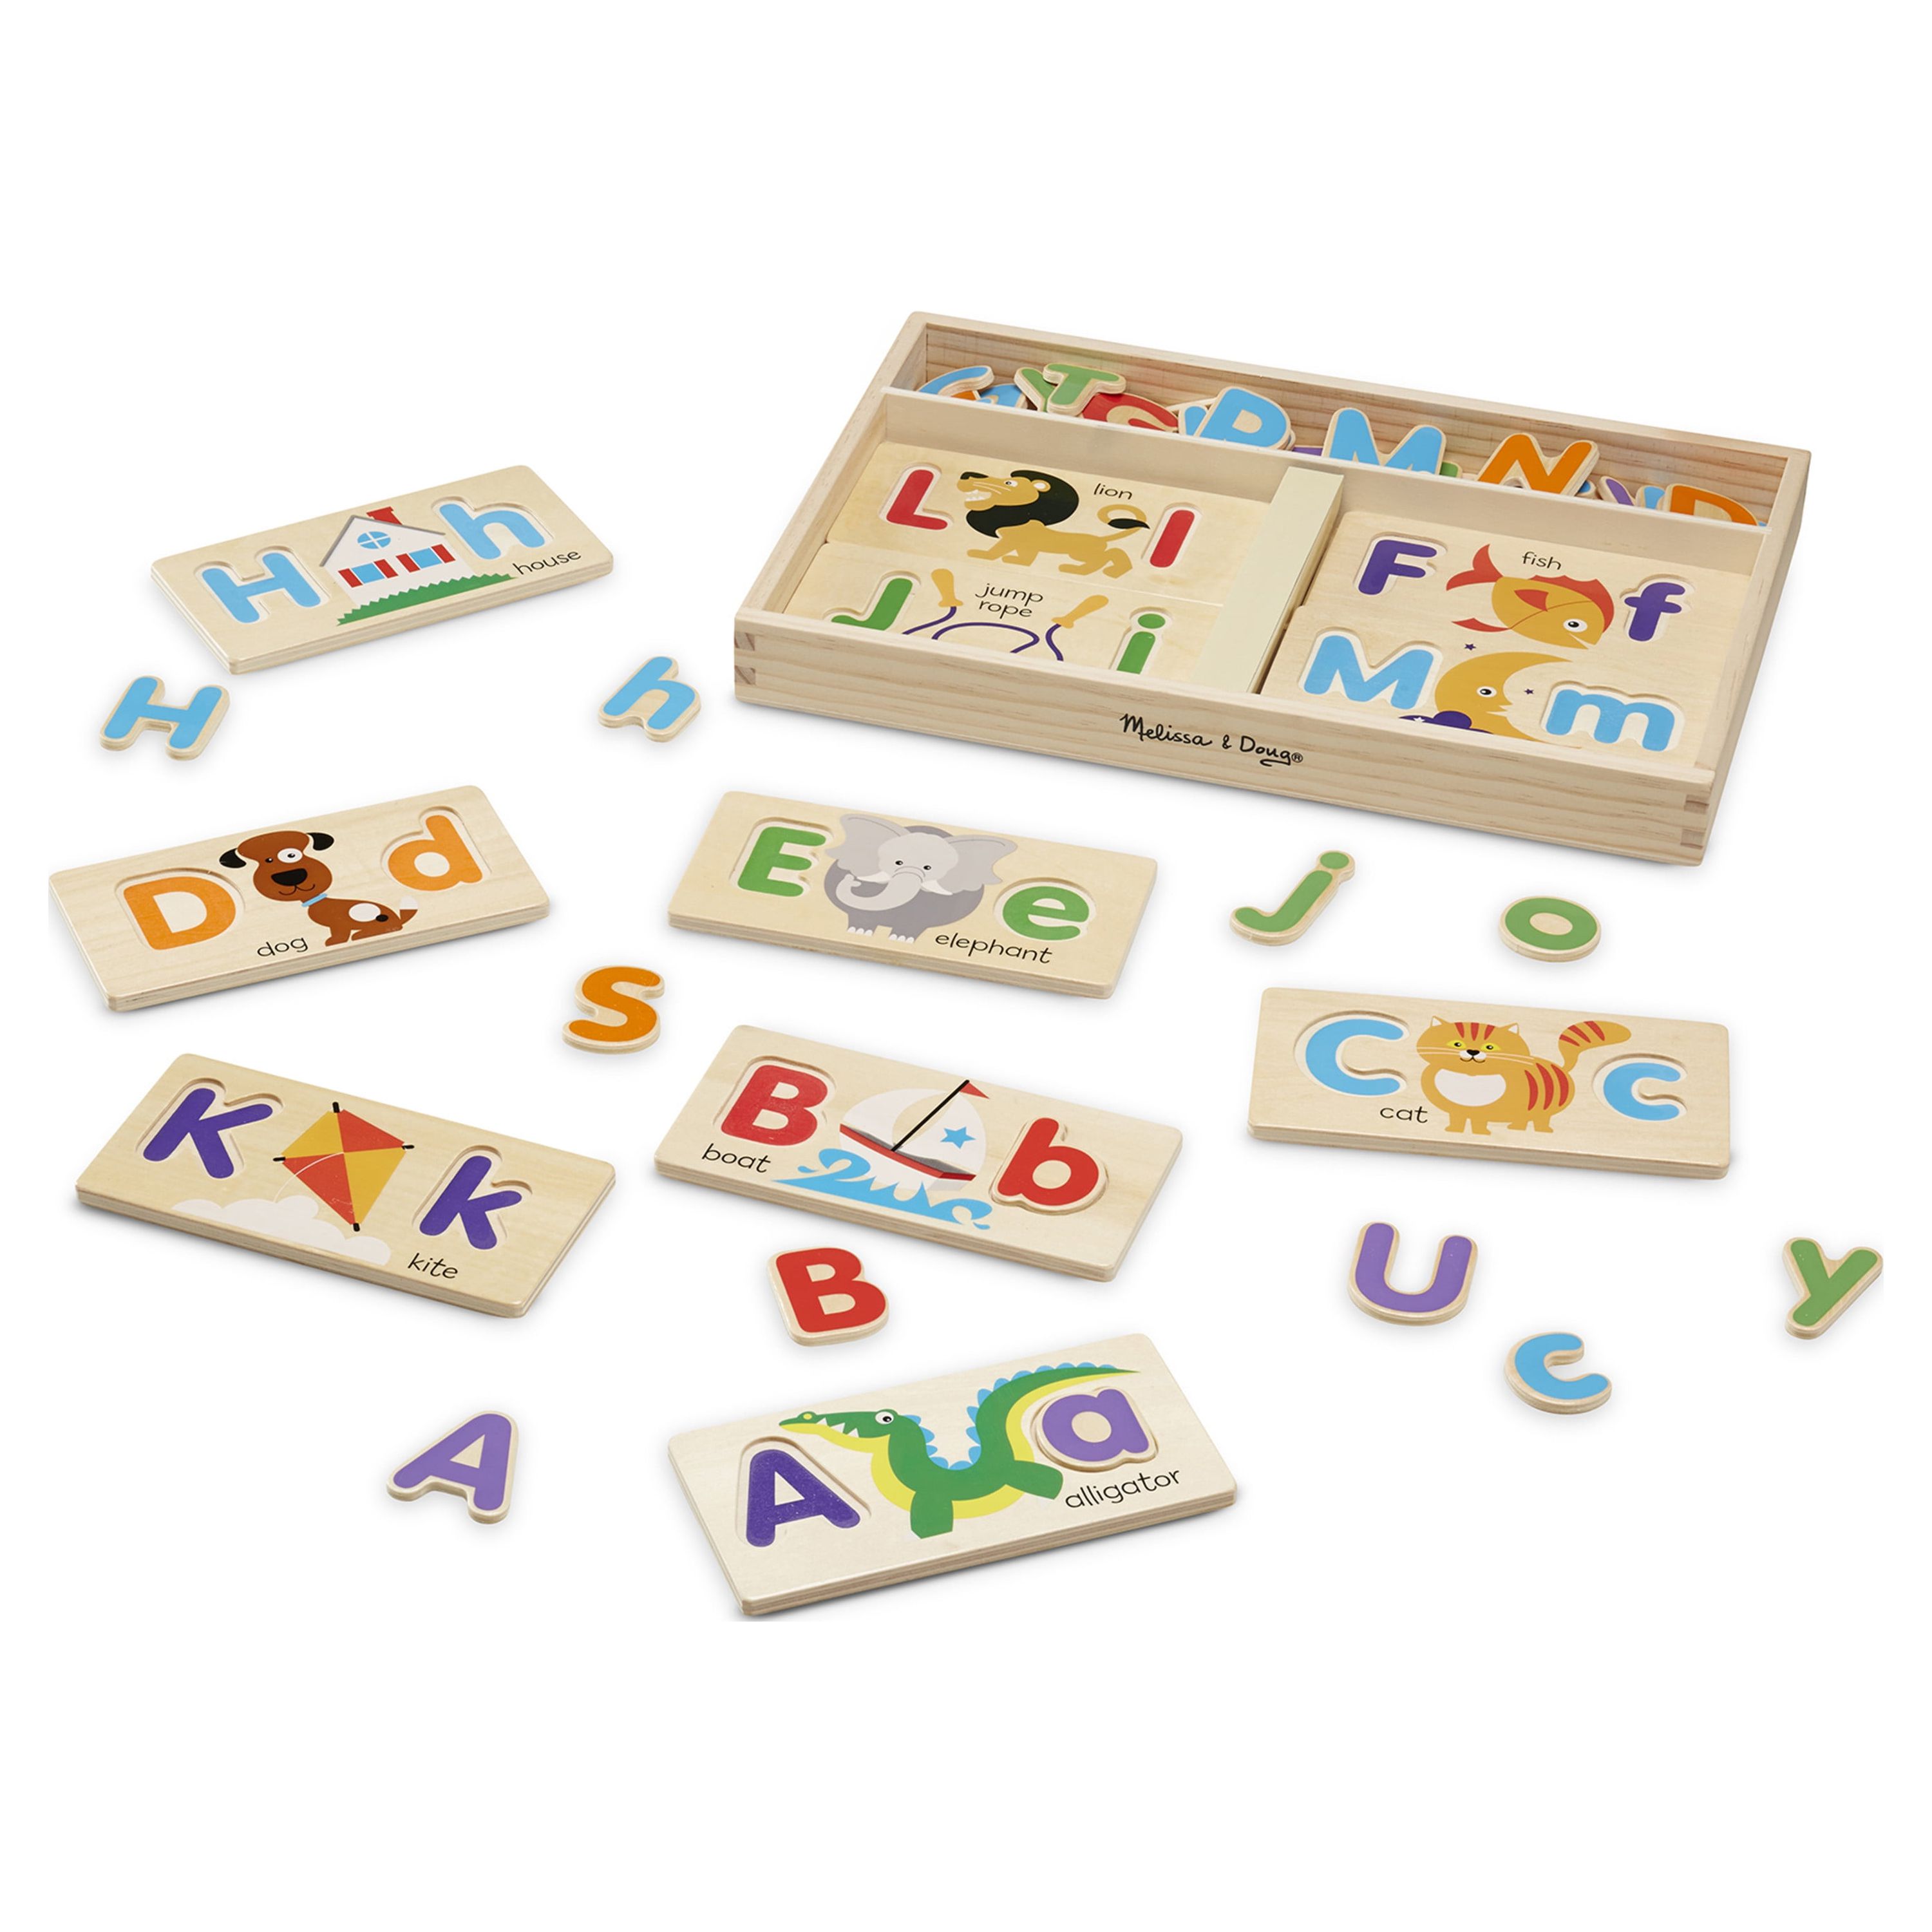 Melissa & Doug ABC Picture Boards - Educational Toy With 13 Double-Sided Wooden Boards and 52 Letters - image 4 of 9